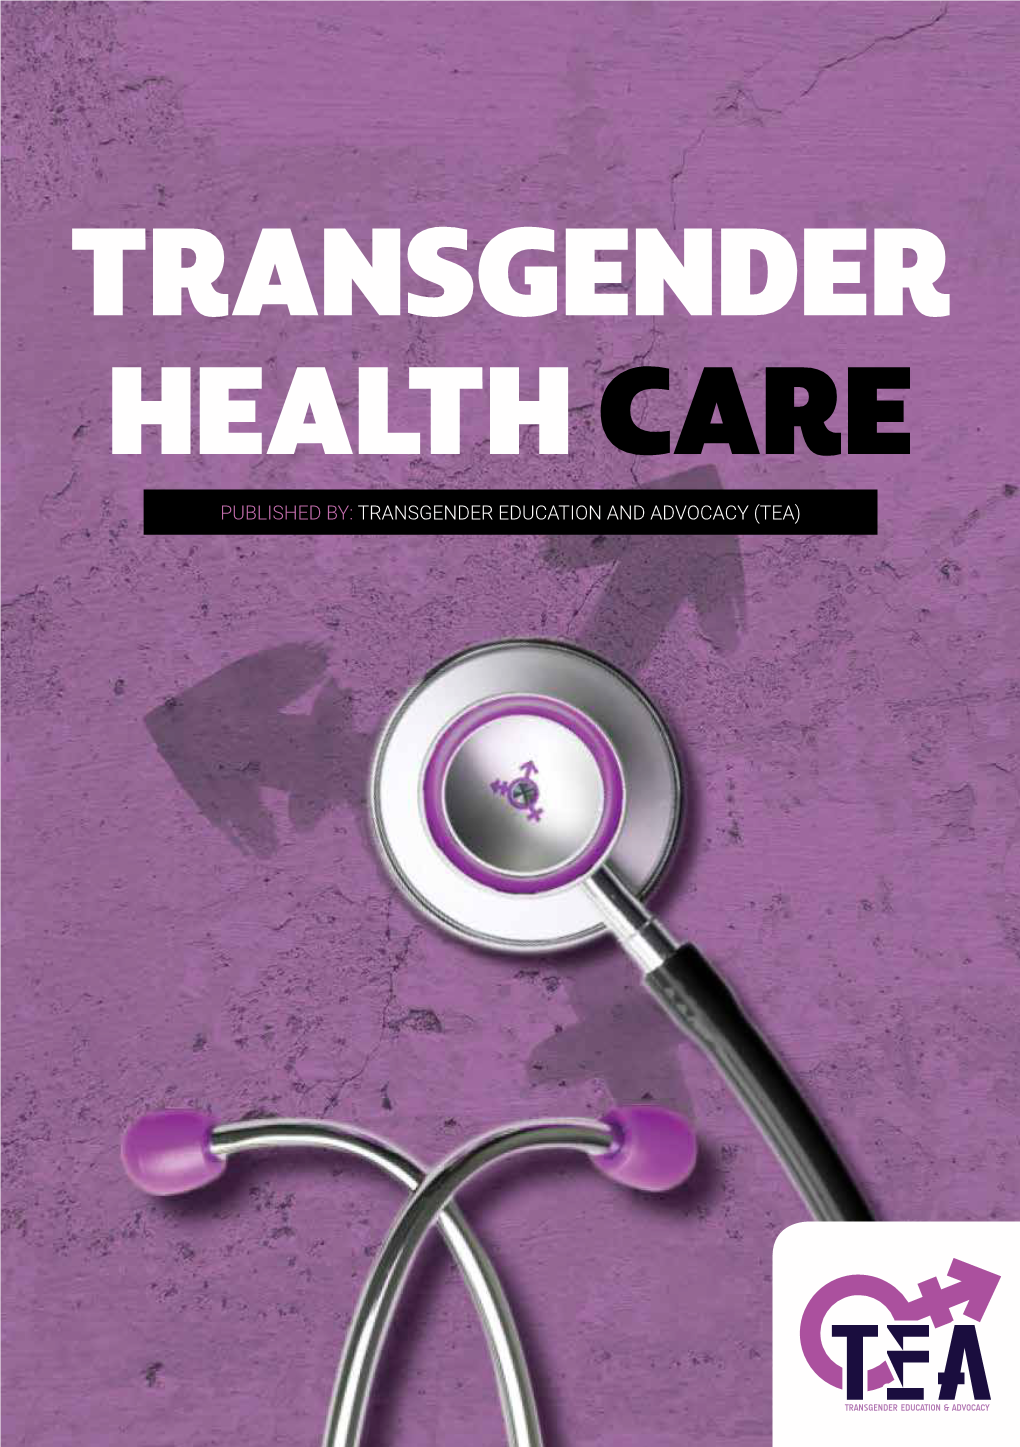 Transgender Health Care Published By: Transgender Education and Advocacy (Tea)